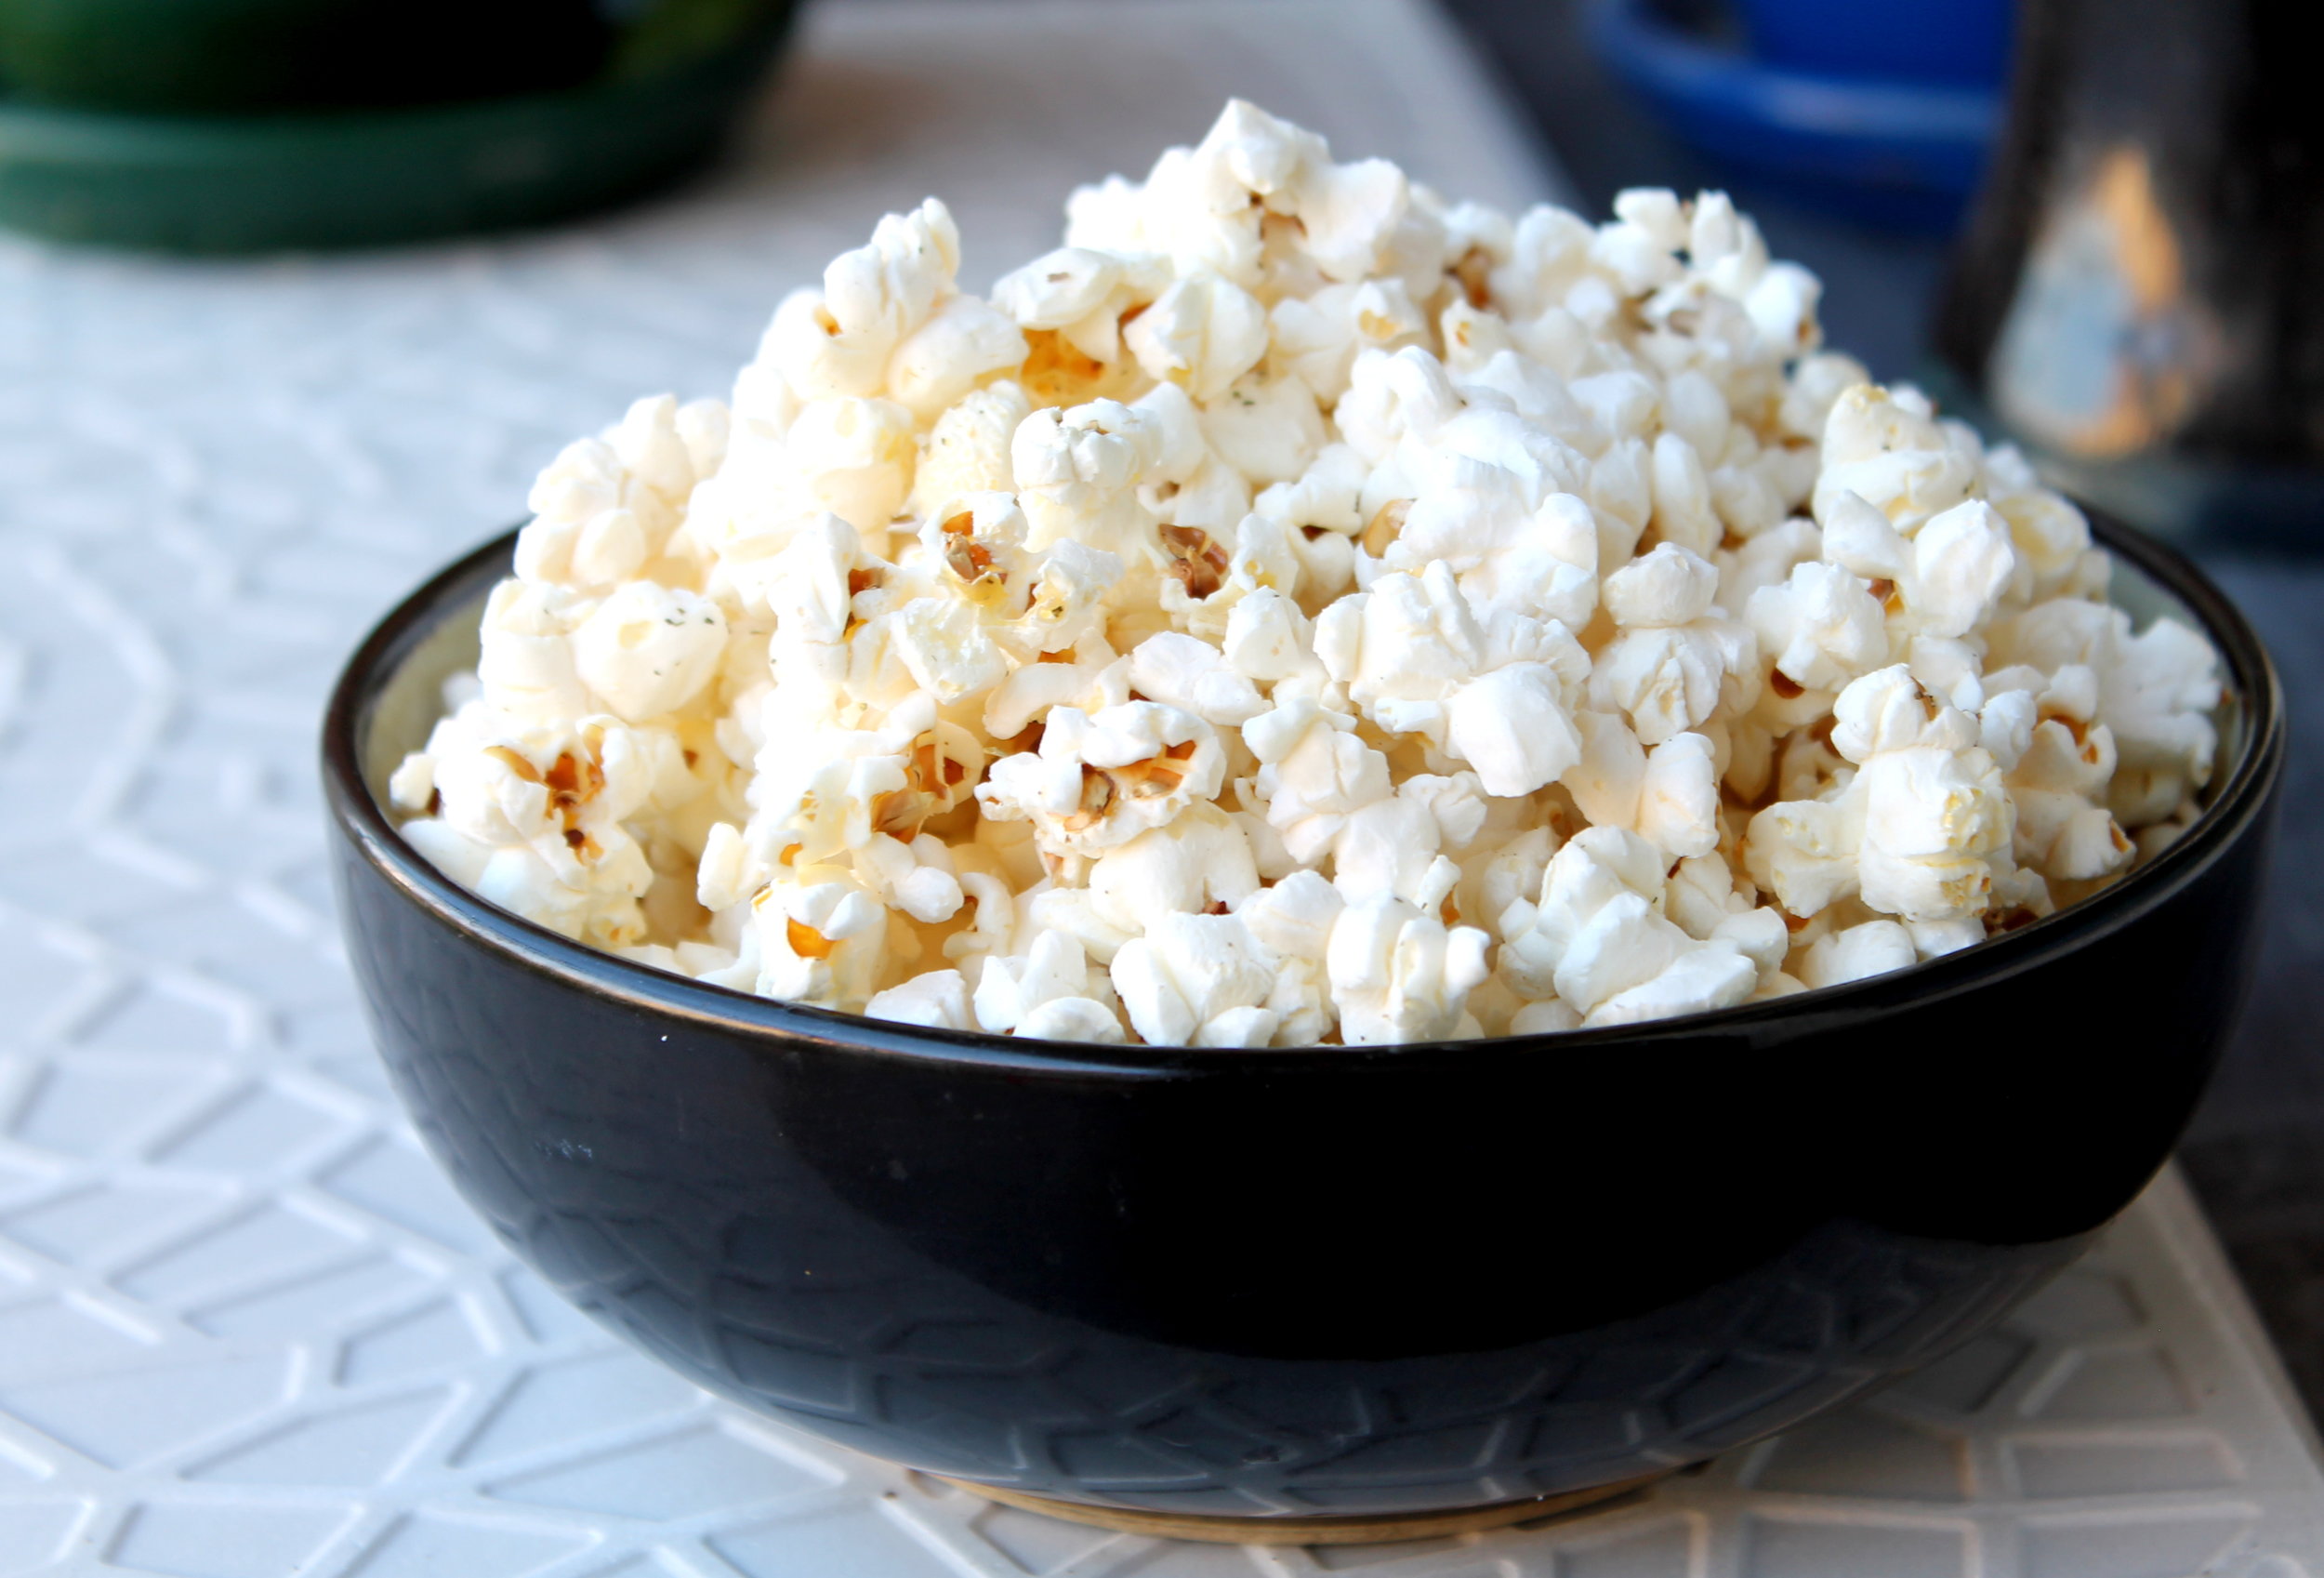 Stove-top popcorn is exactly what you need while binge watching tv - it's a nutritious snack, naturally gluten-free, vegan and literally takes 5 minutes to pop!